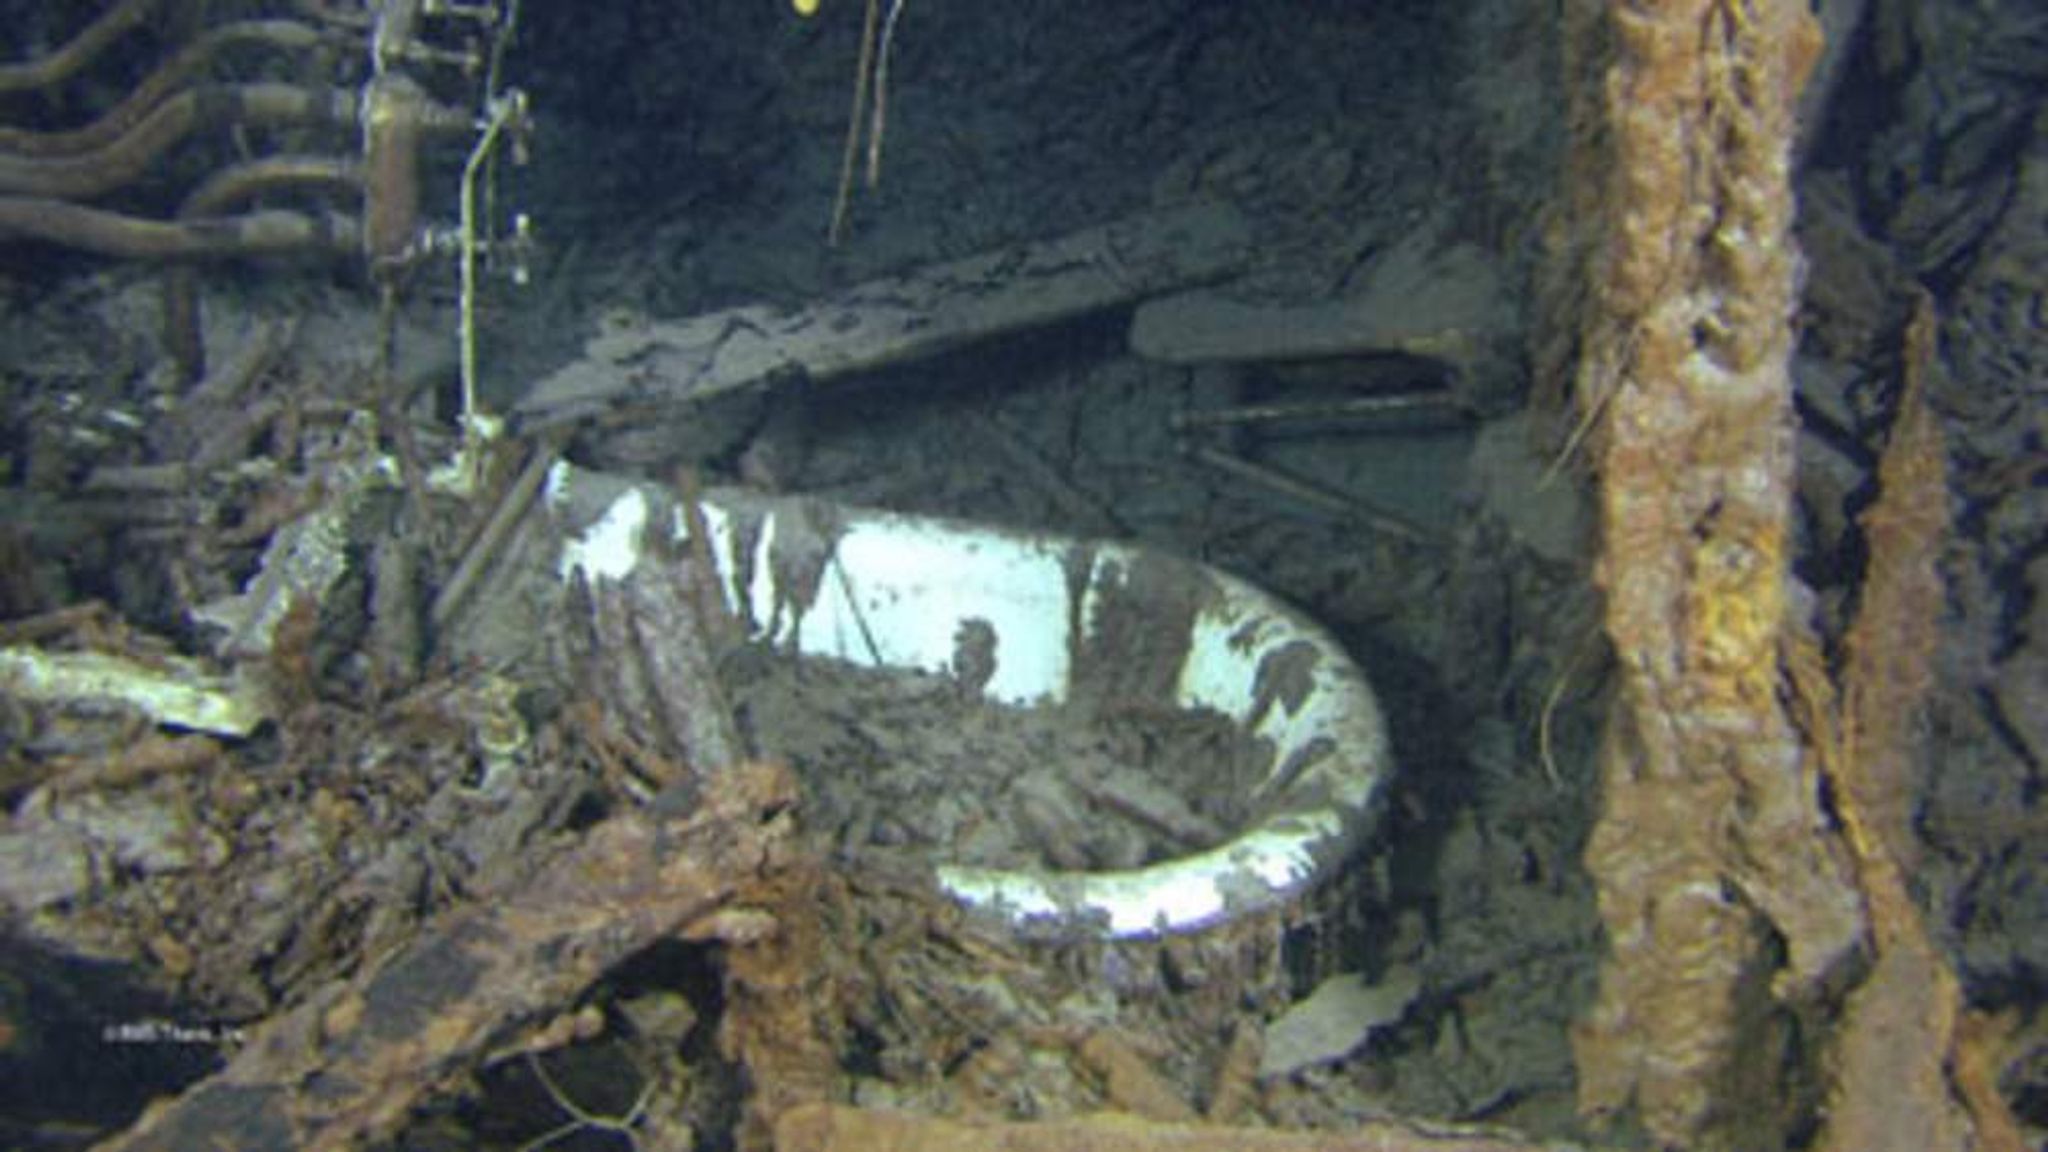 New Images Of Titanic Wreck Revealed In Court, World News